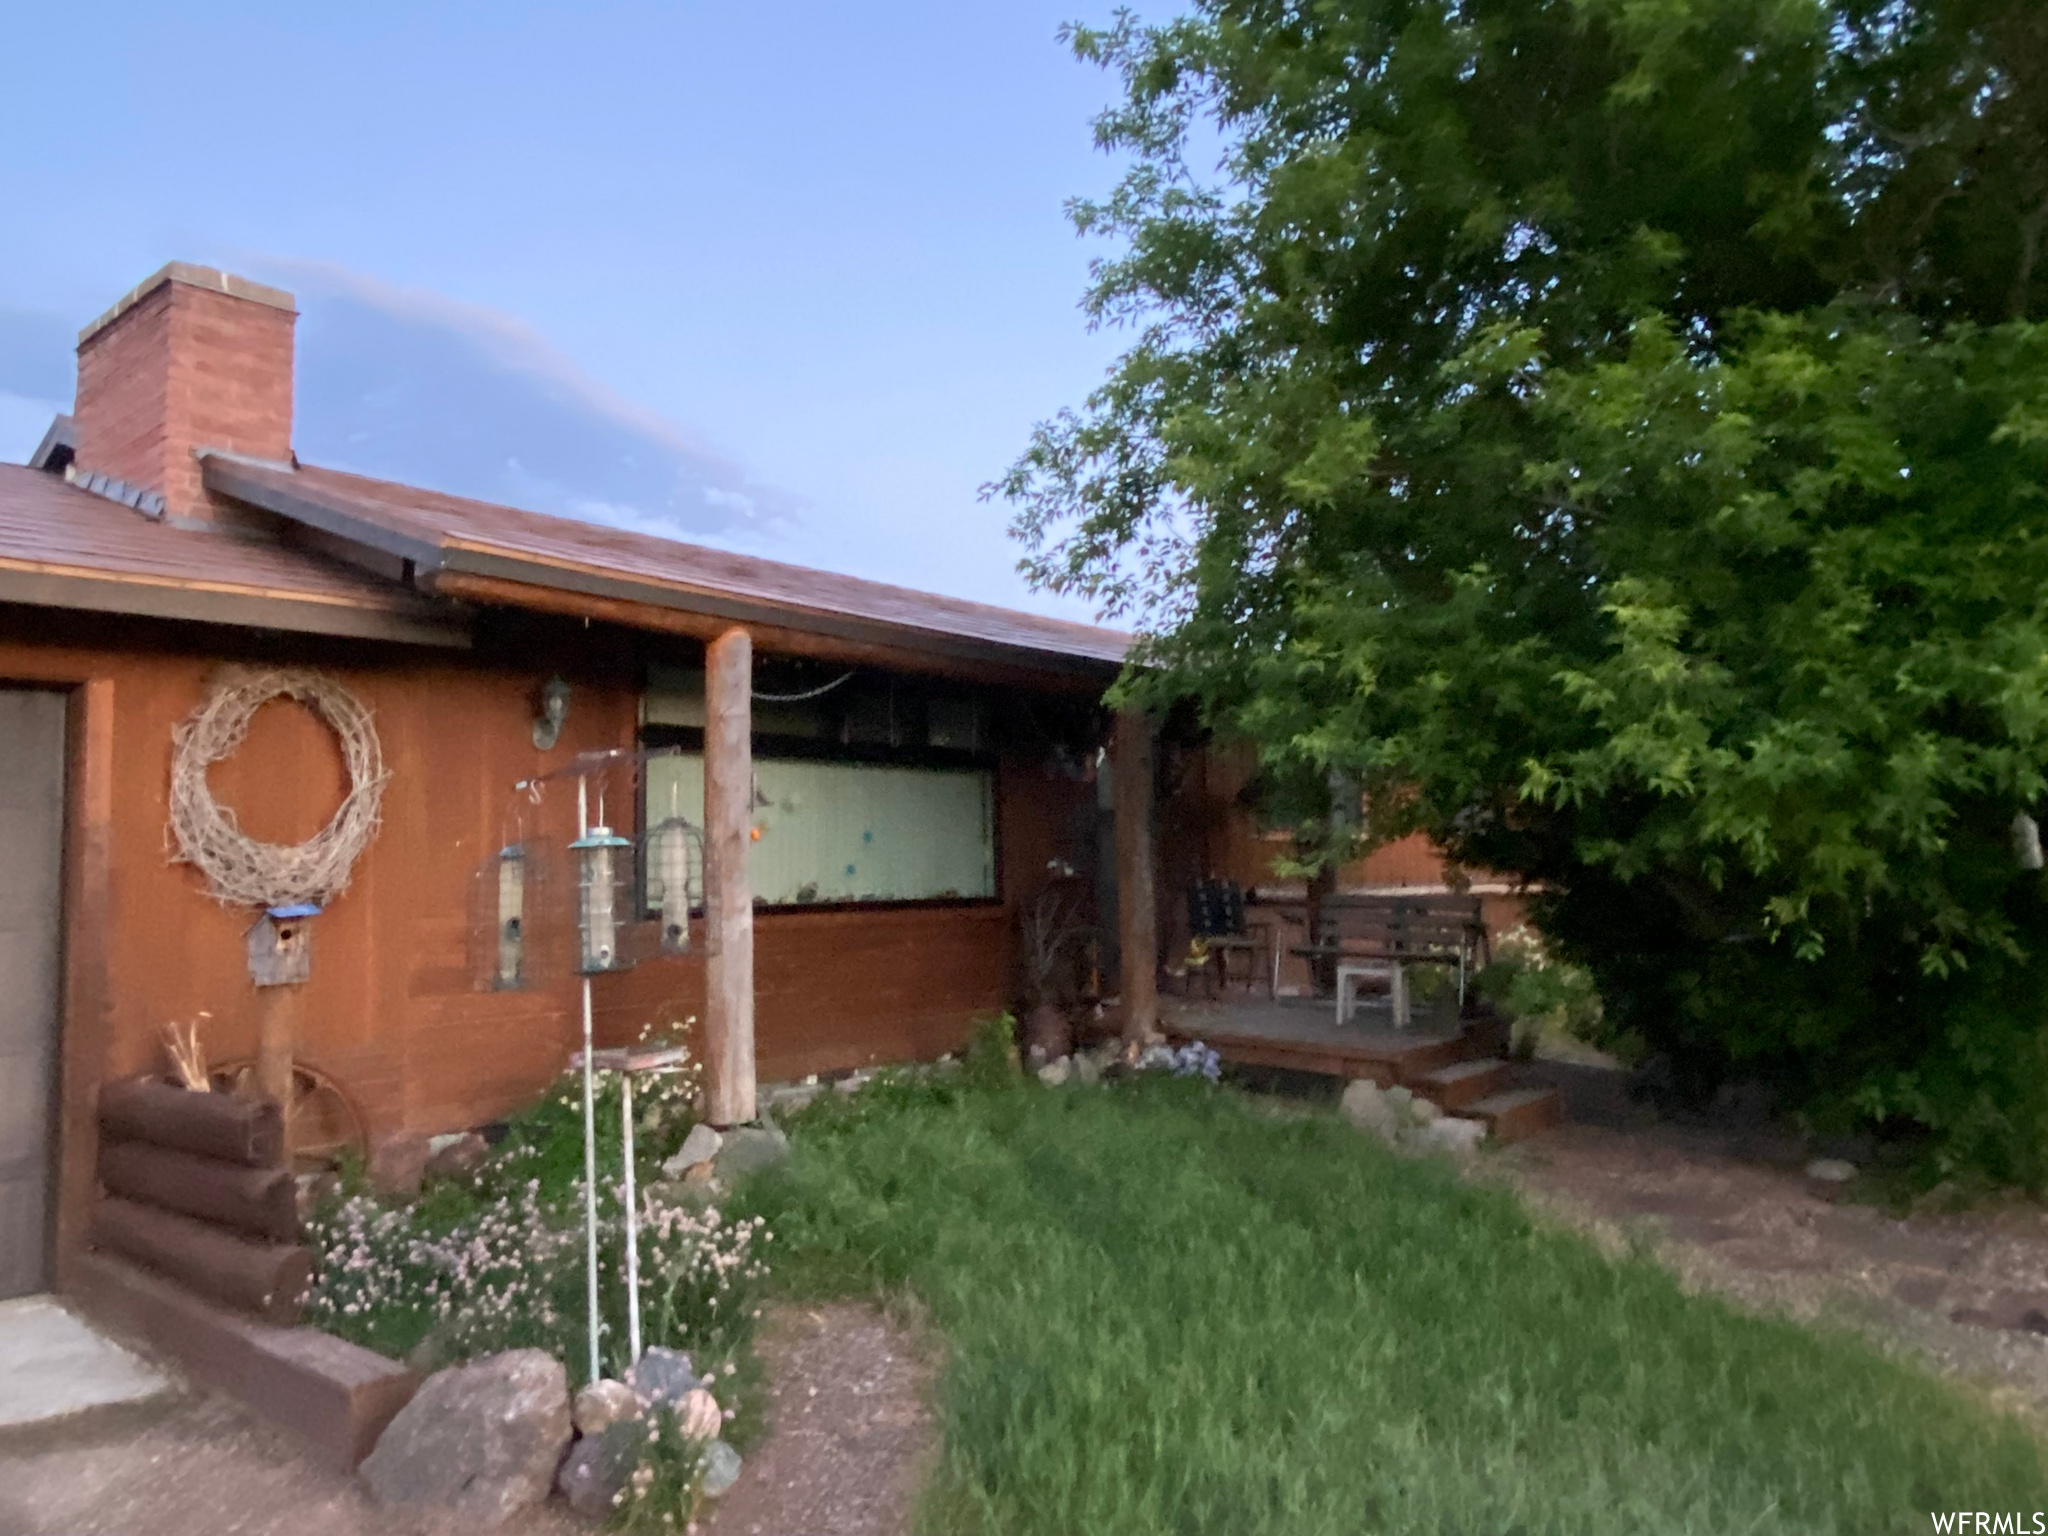 2406 SMOKEY CANYON, Auburn, Wyoming 83111, 5 Bedrooms Bedrooms, 13 Rooms Rooms,2 BathroomsBathrooms,Residential,For sale,SMOKEY CANYON,1832491